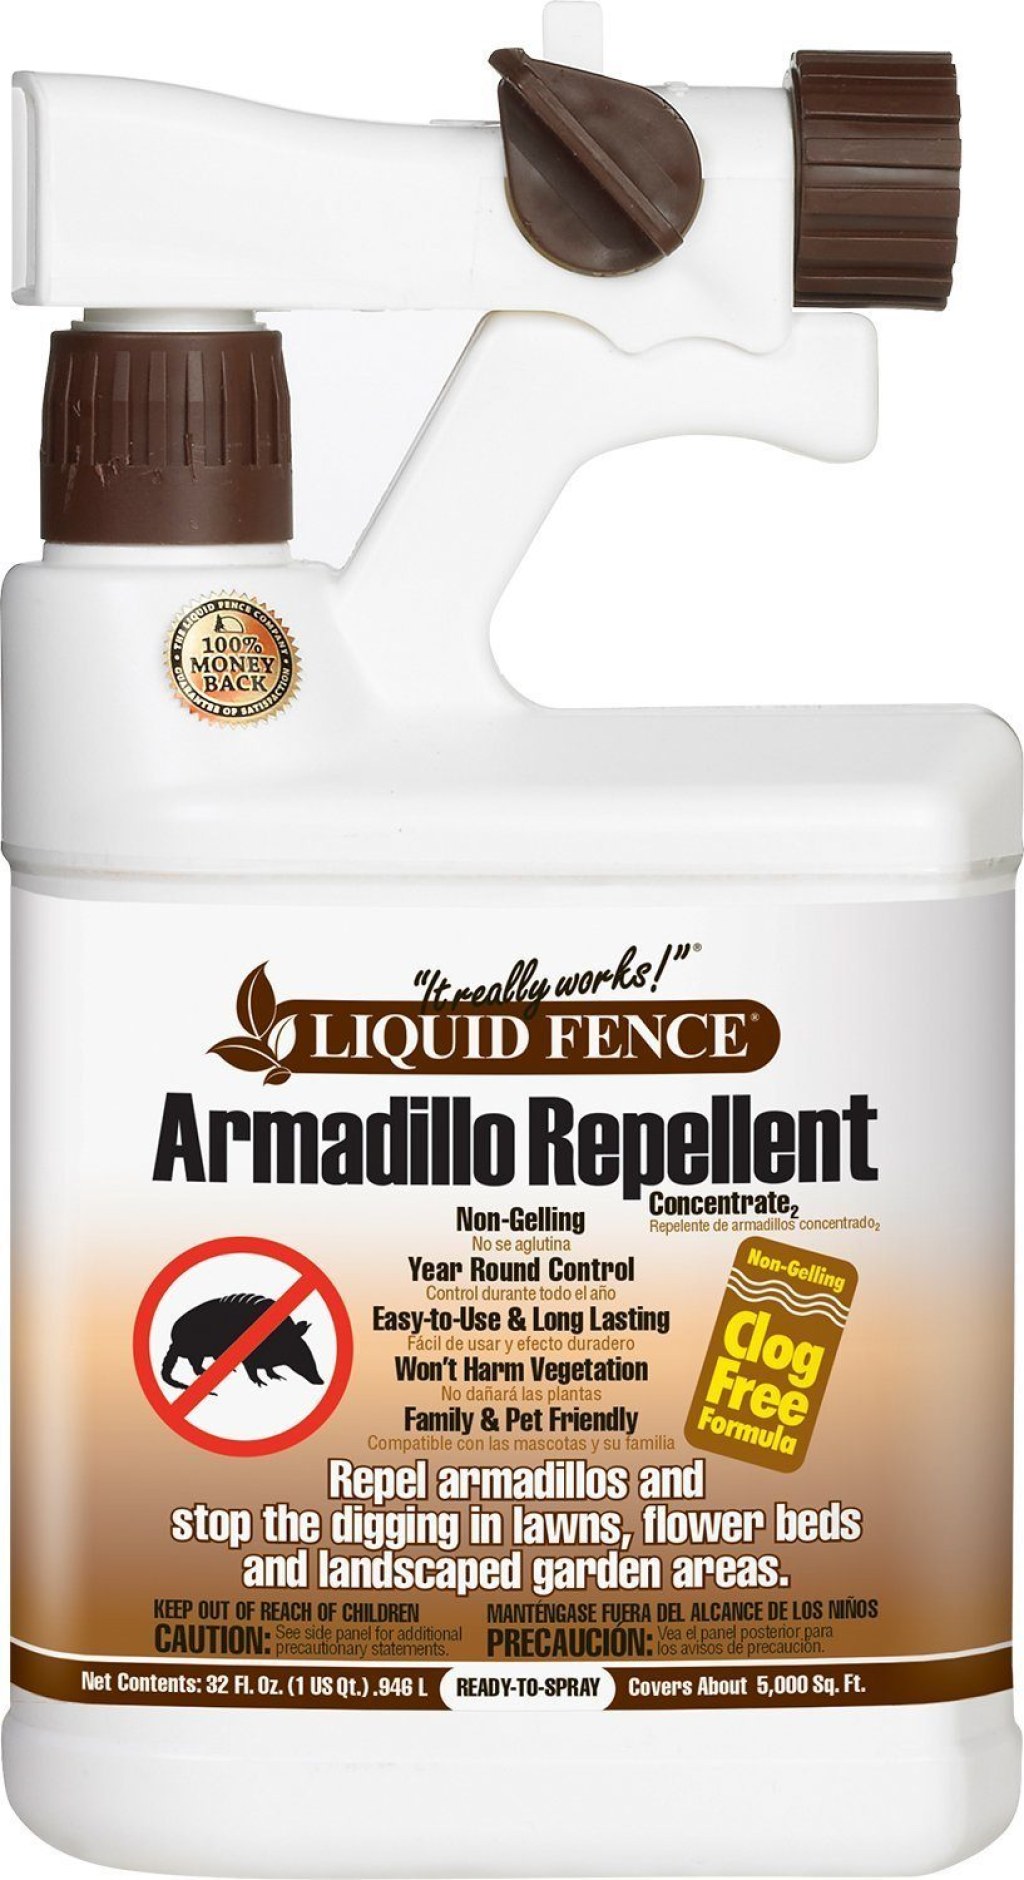 Picture of: Armadillo Repellent:  Best Selling Repellents to Get Rid of